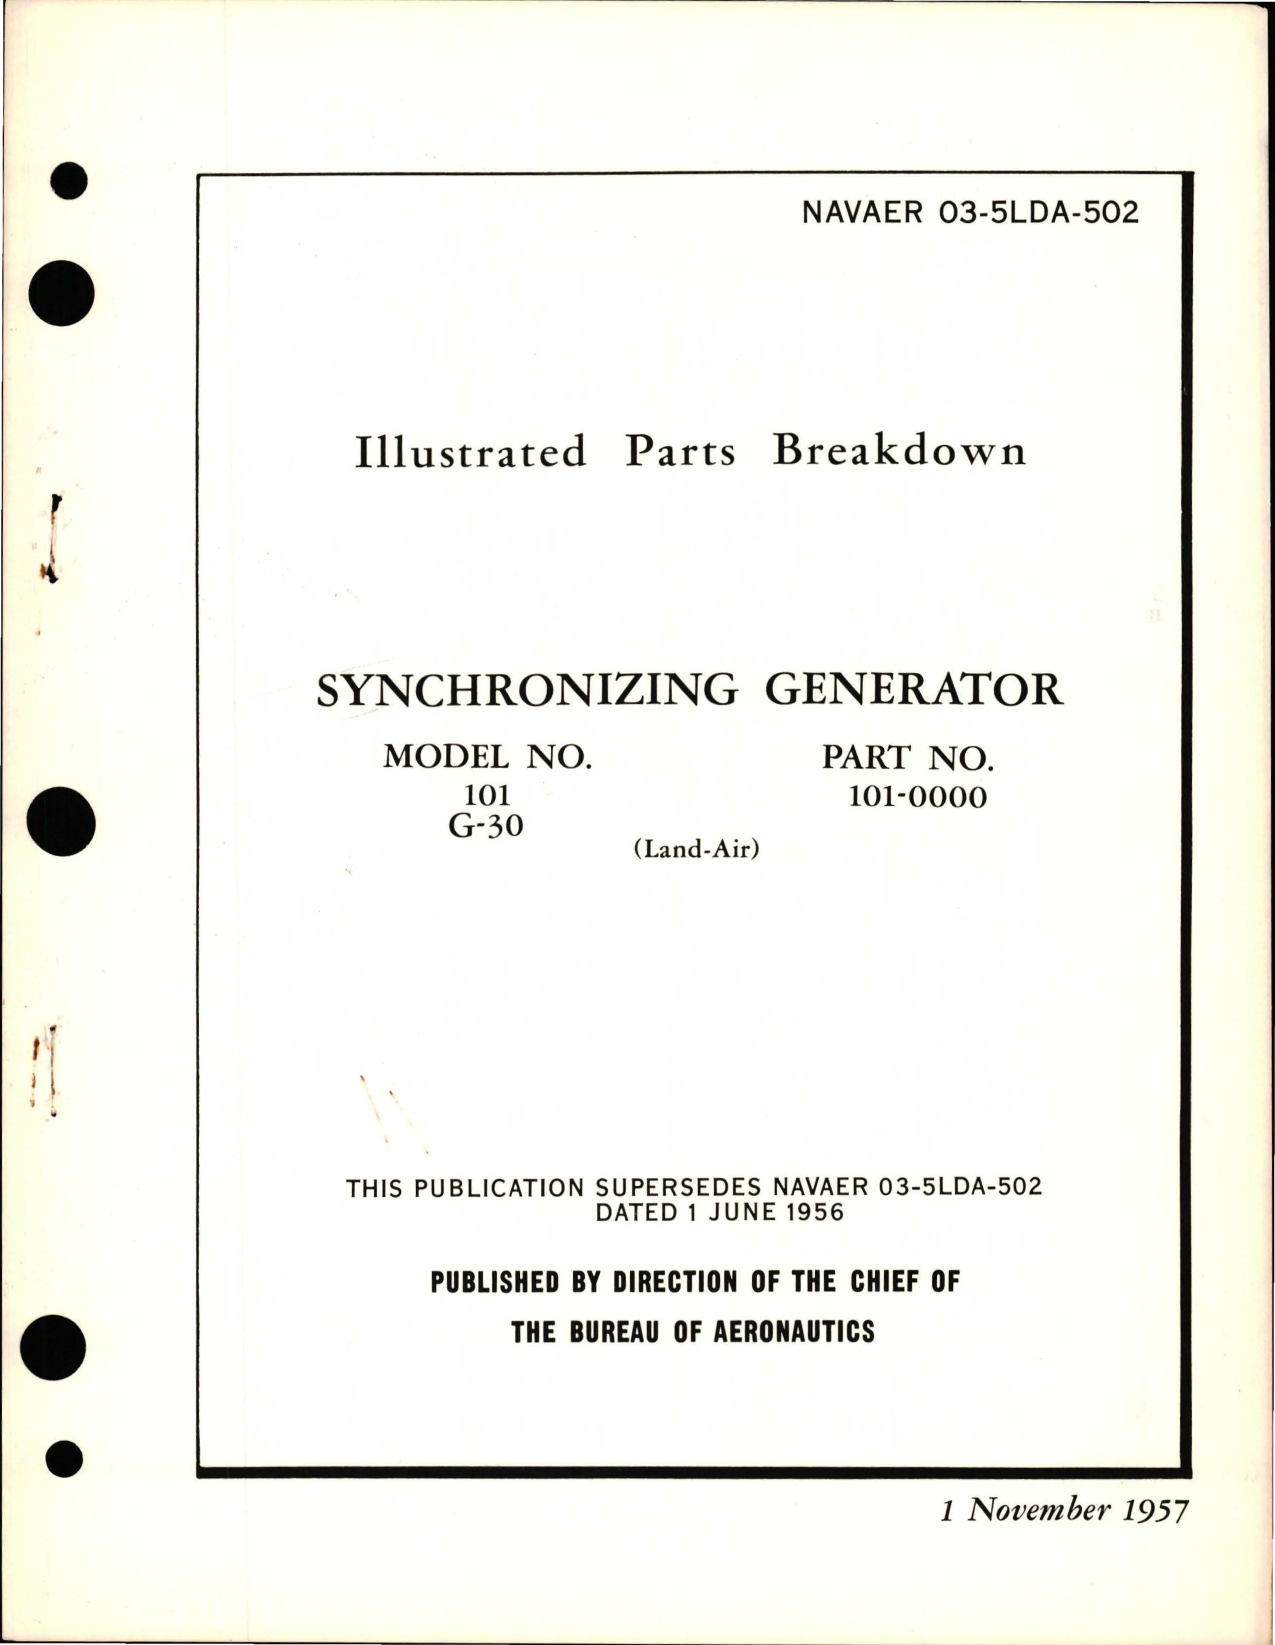 Sample page 1 from AirCorps Library document: Illustrated Parts Breakdown for Synchronizing Generator - Model 101 and G-30 - Part 101-0000